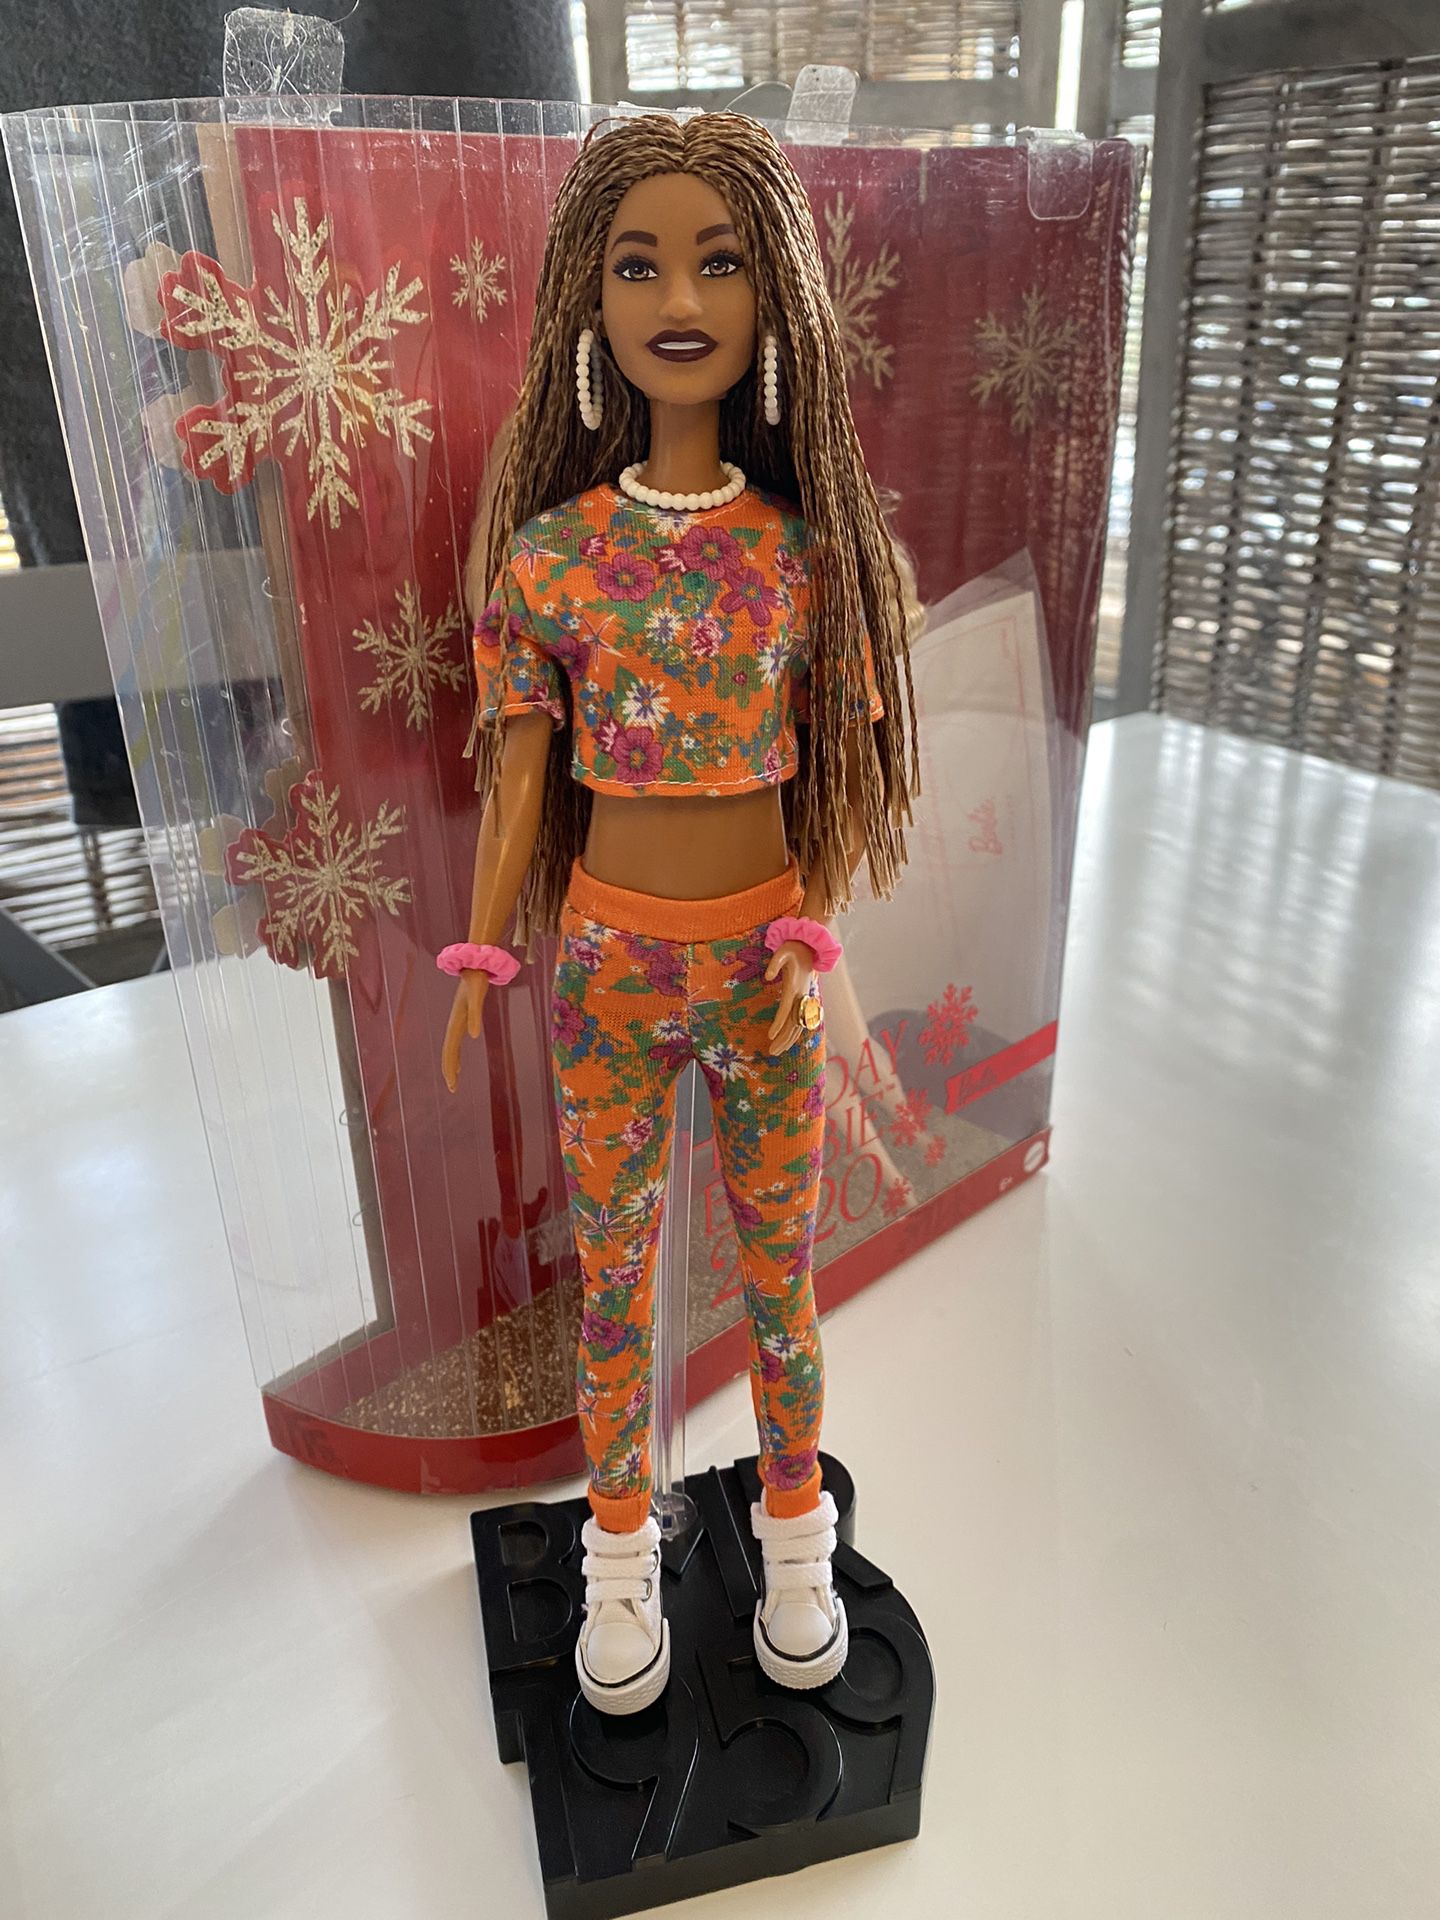 Barbie Fashionista Styled In A Floral Leggings And Top